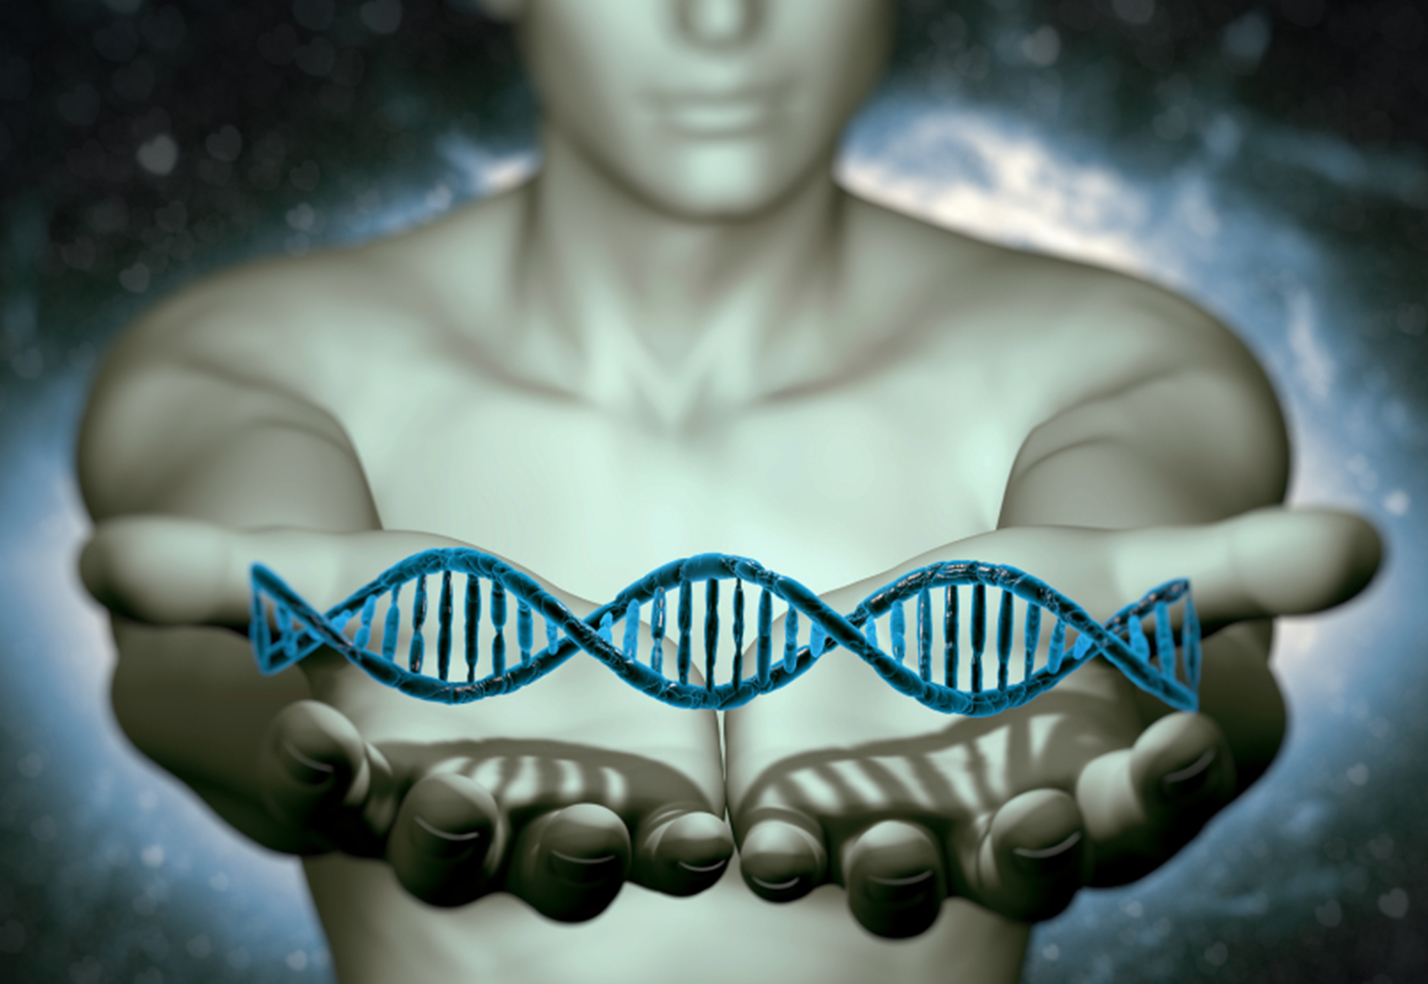 The Future of Personalized Genomics Market: A Lucrative Industry with Massive Growth Potential